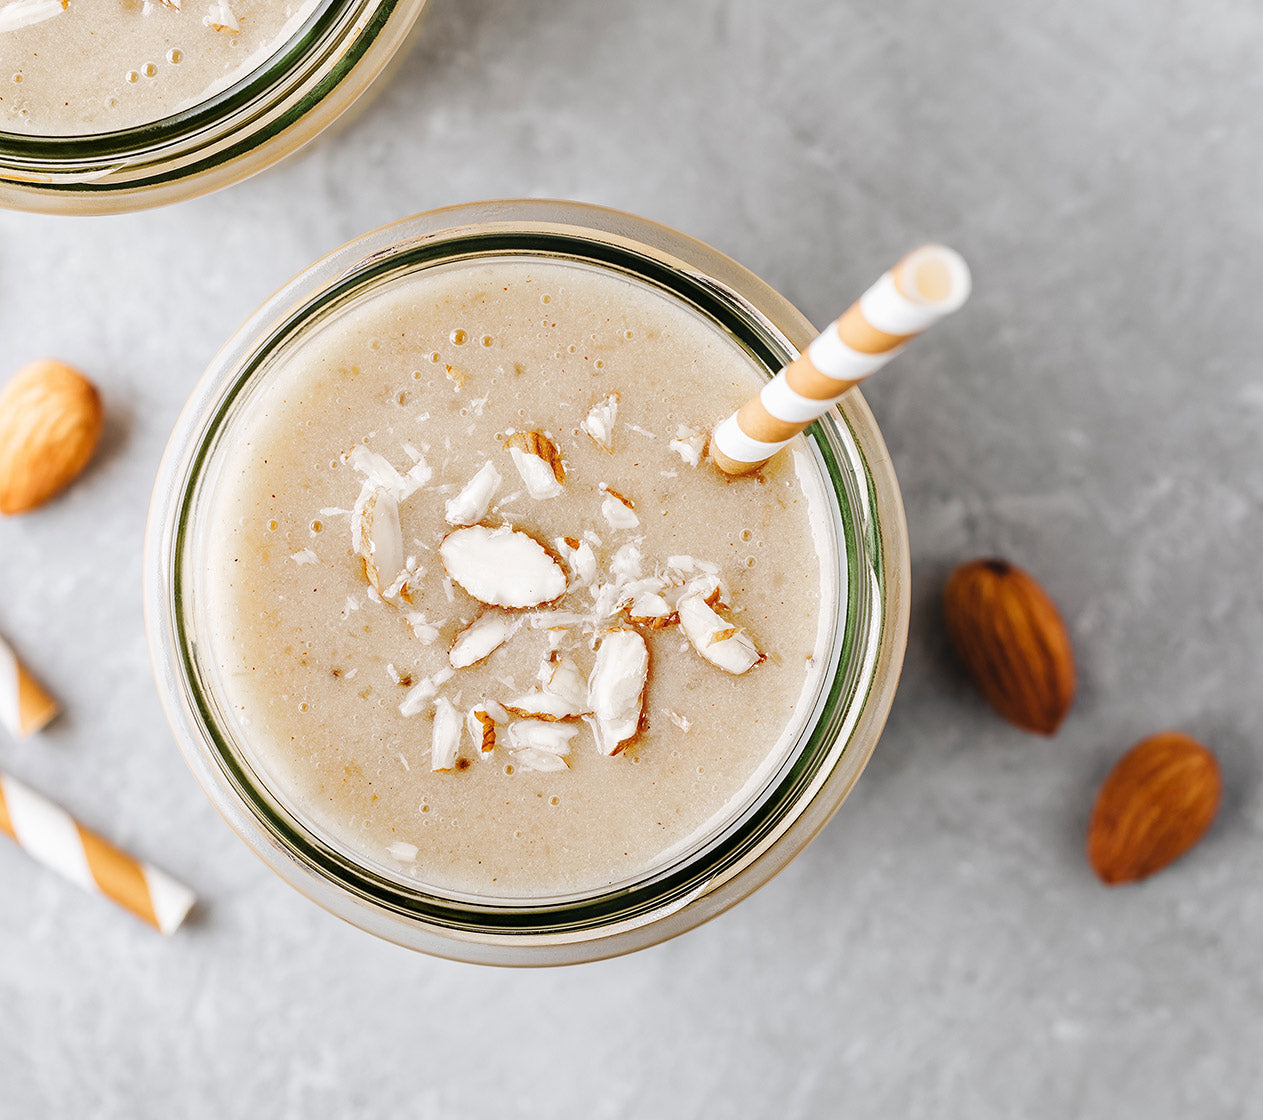 BANANA & ALMOND BUTTER SMOOTHIE